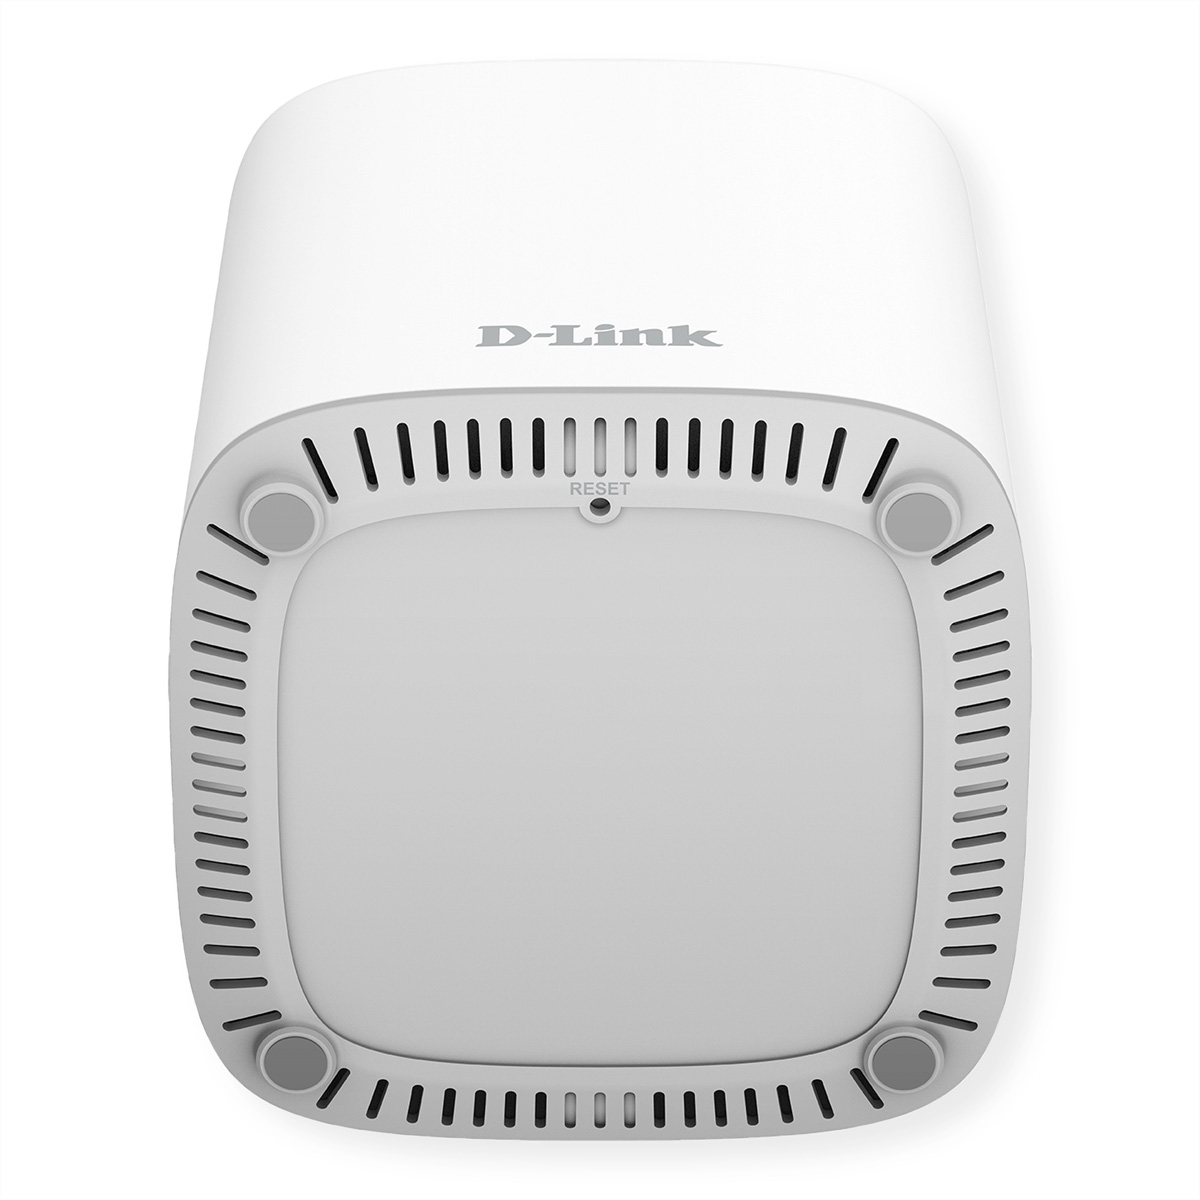 Mesh 1,8 System, 6 Access Points D-LINK Wi‑Fi Whole 2er Home Dual AX1800 COVR‑X1862 WLAN Set Band Gbit/s